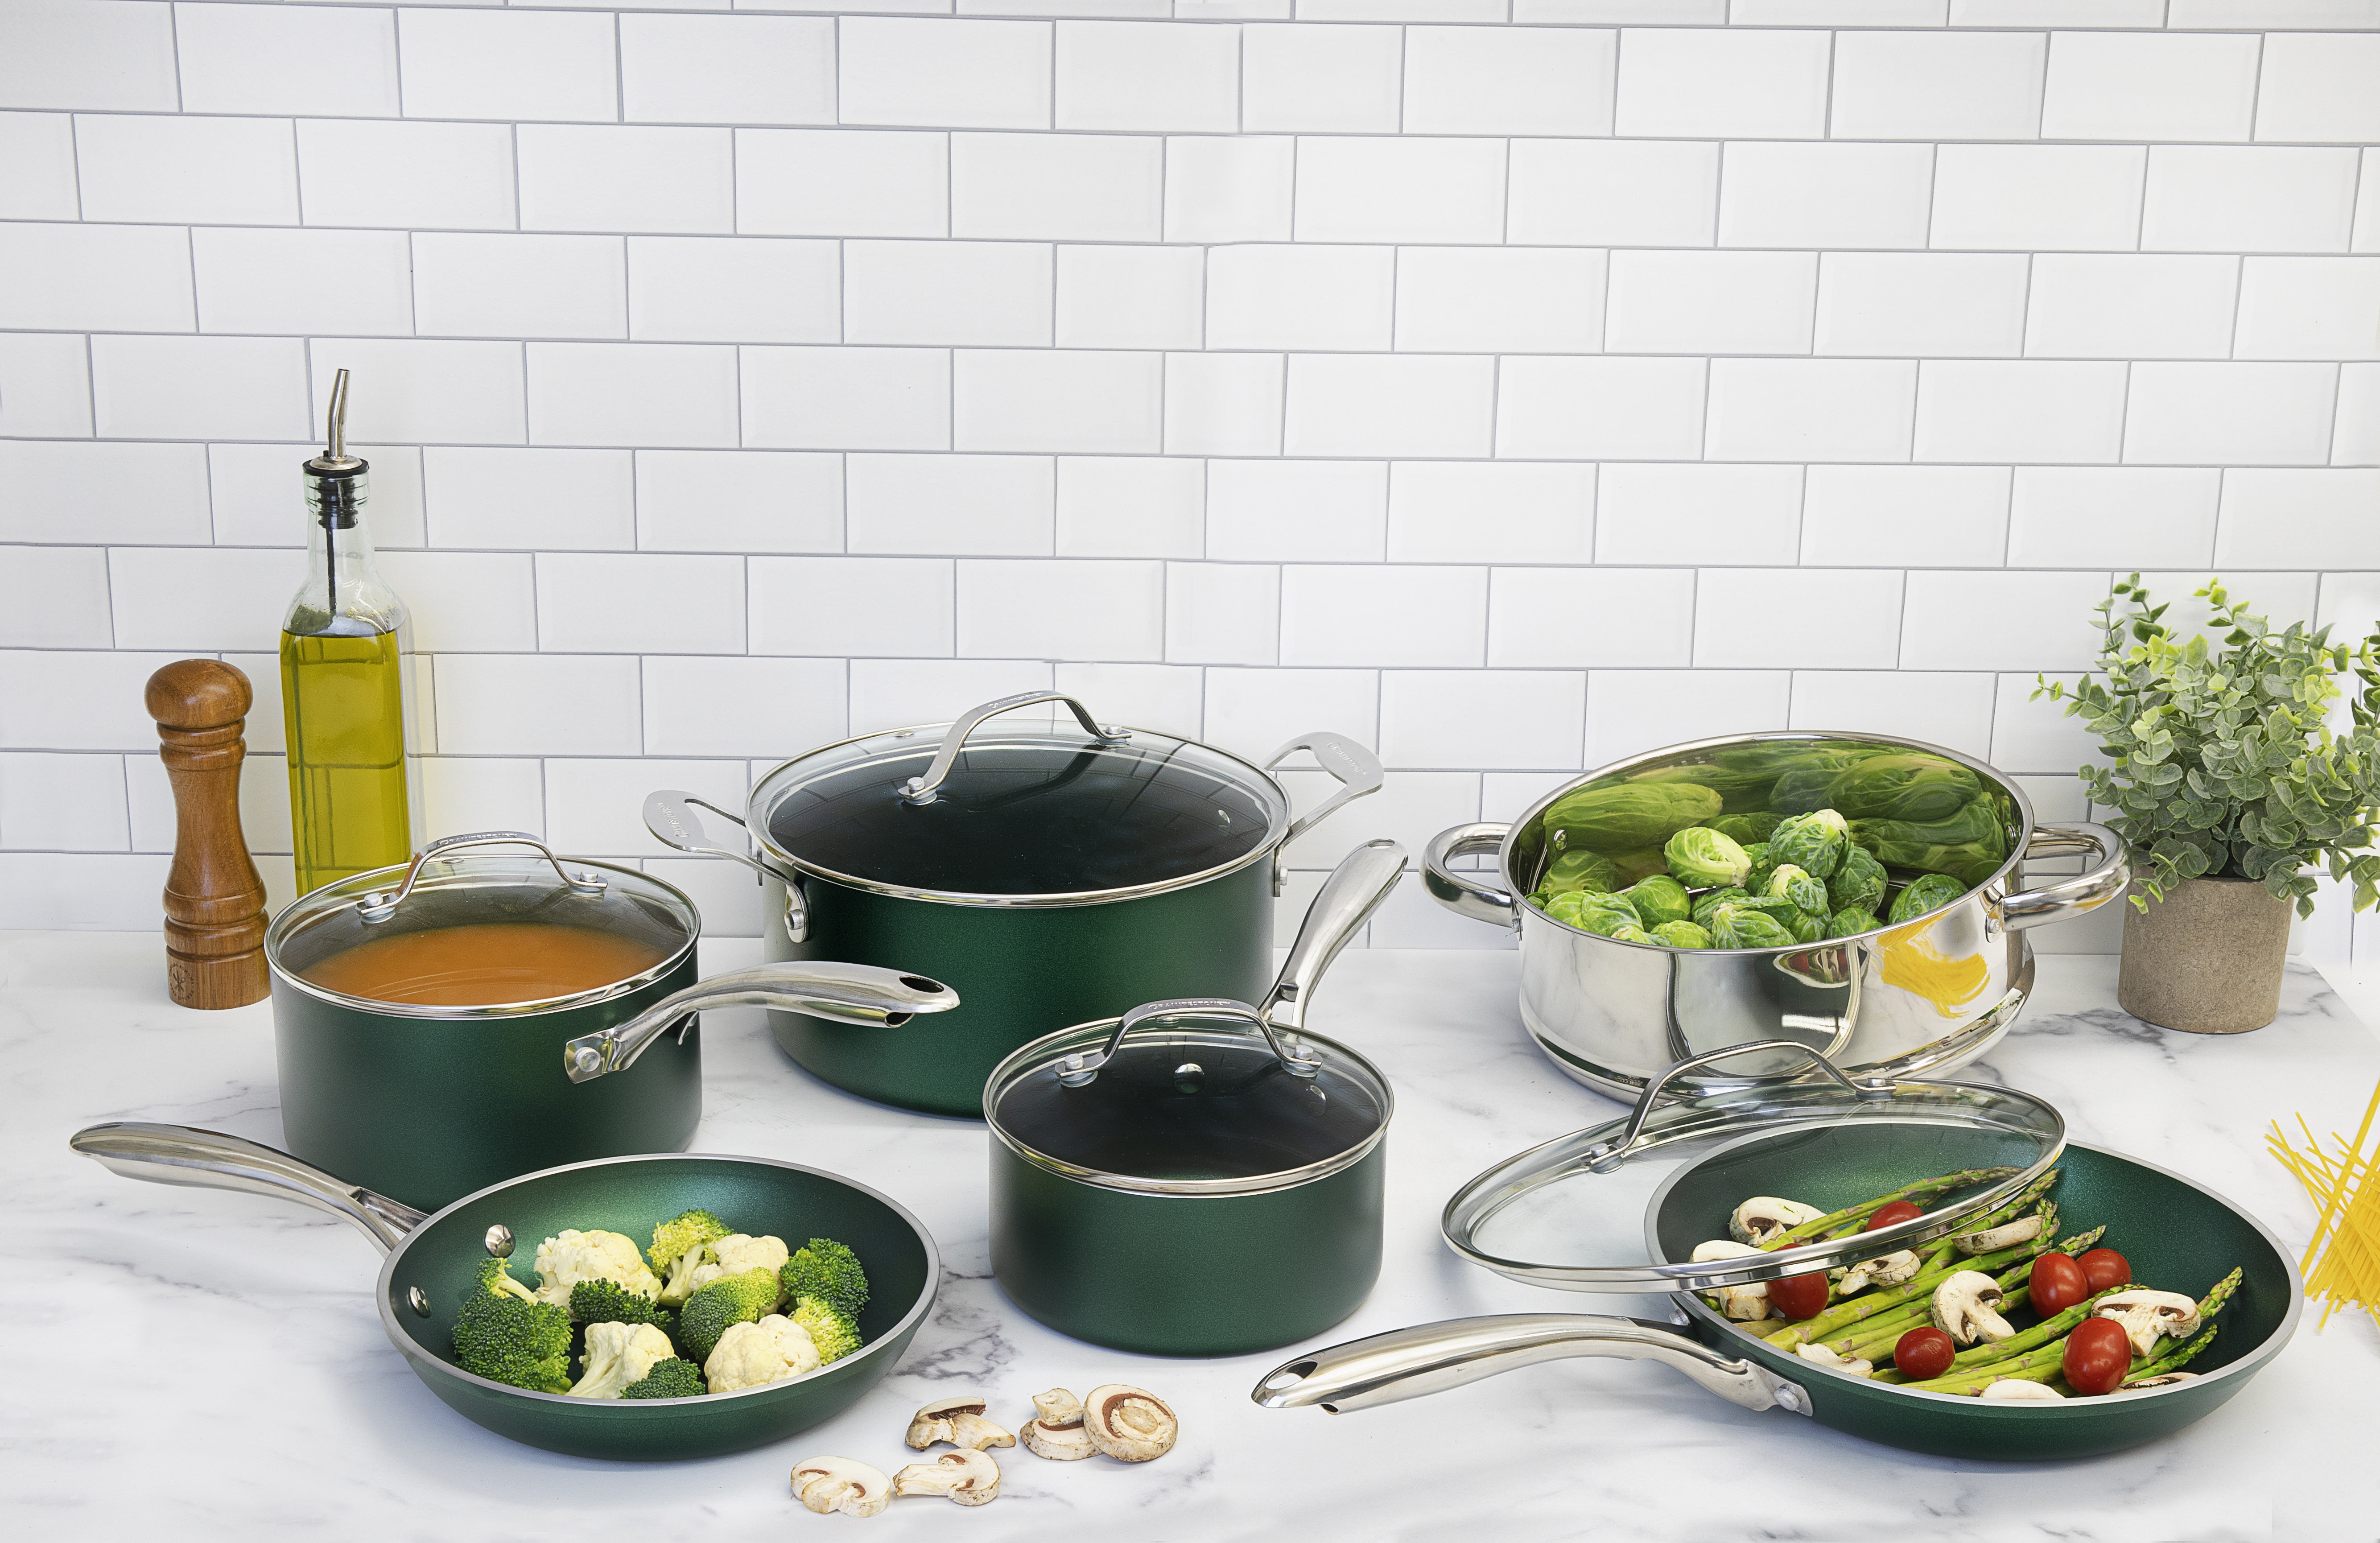 Granite Stone Emerald Collection 10 Piece Pots and Pans Set with